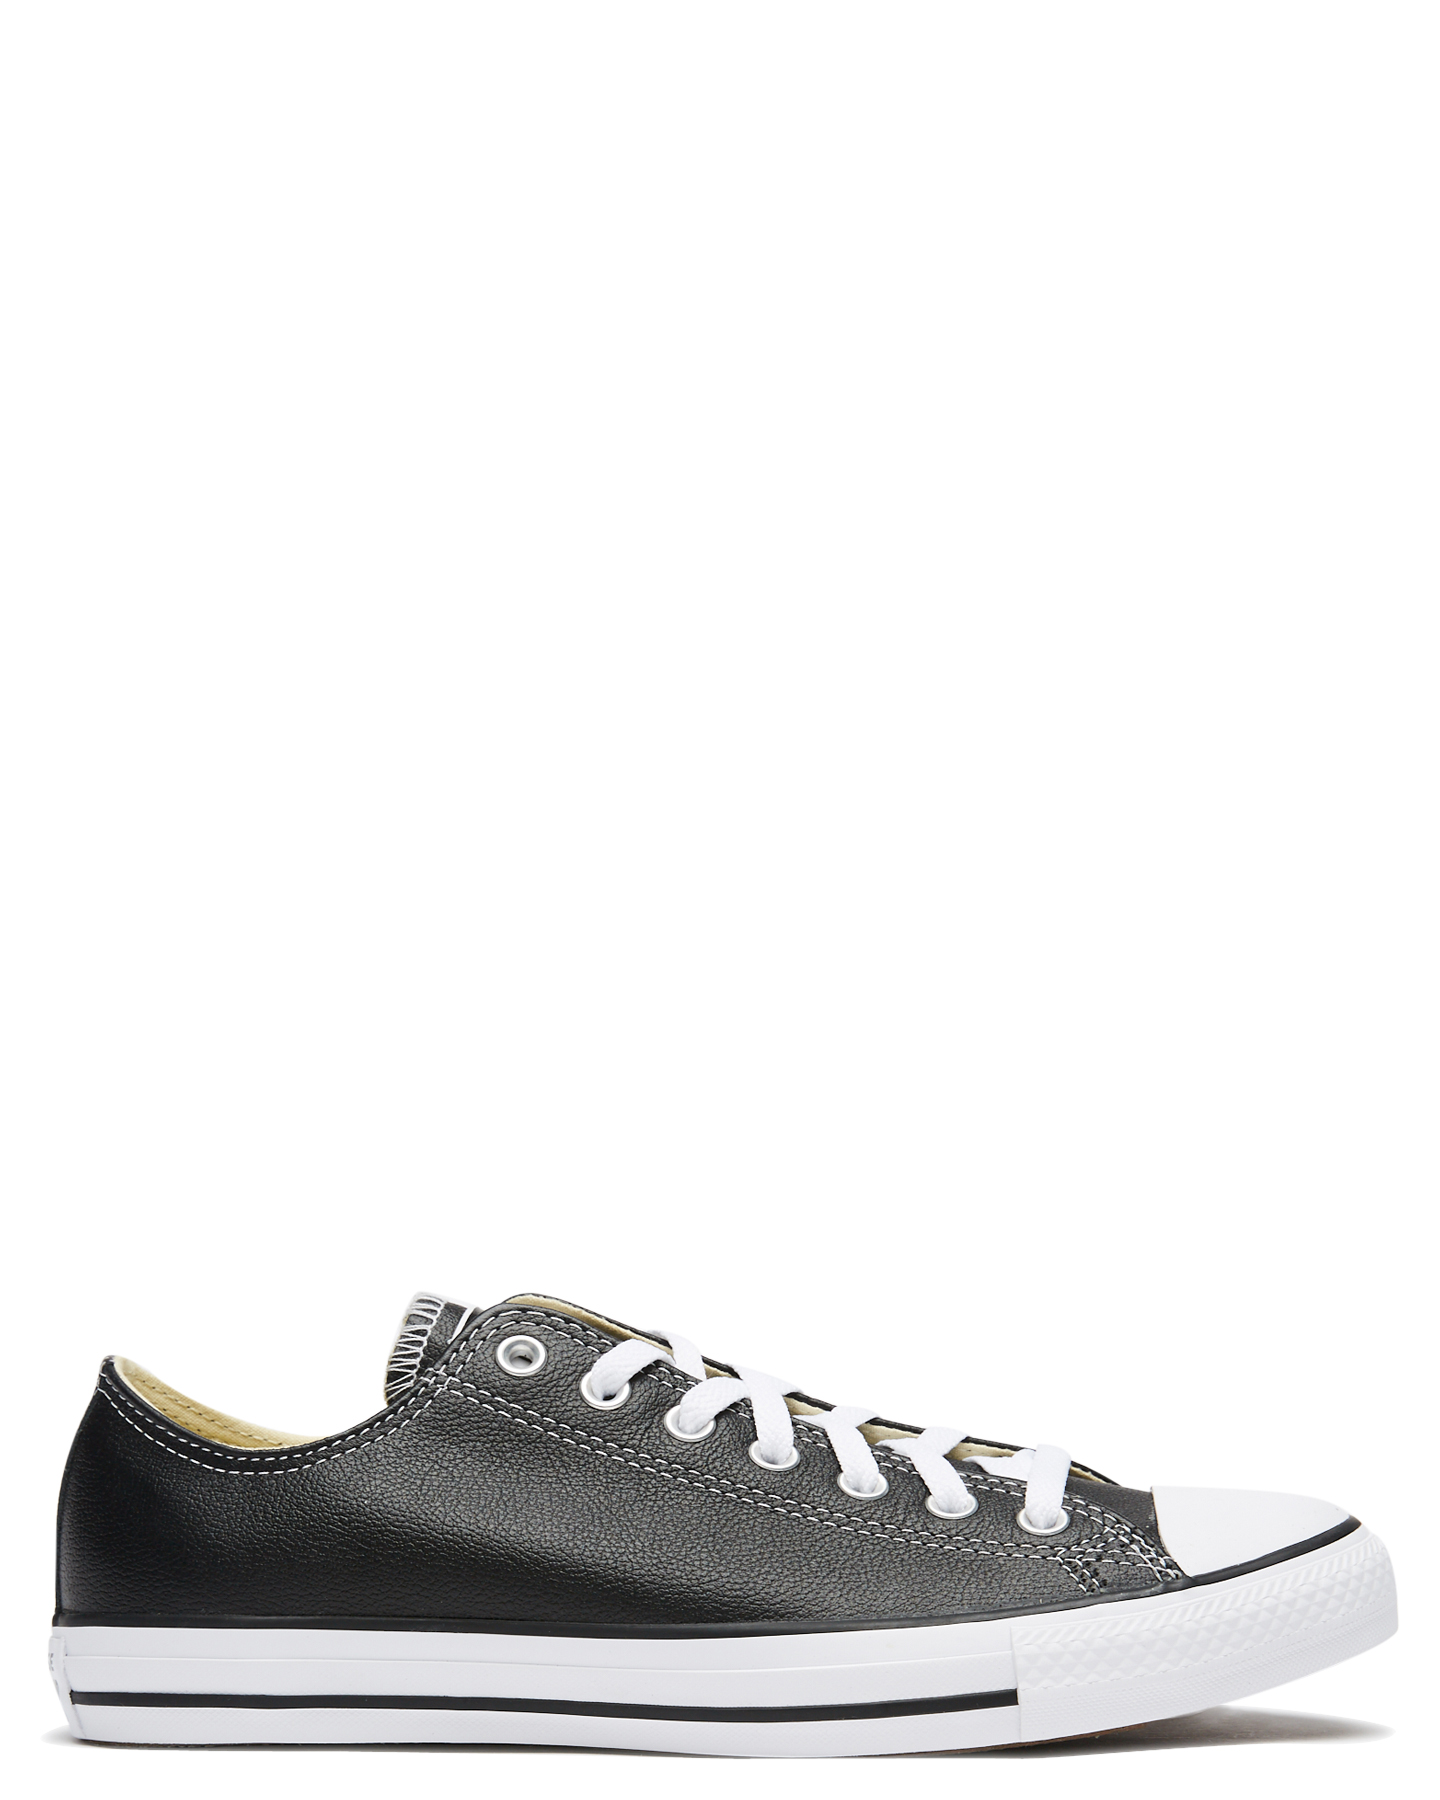 converse mens leather